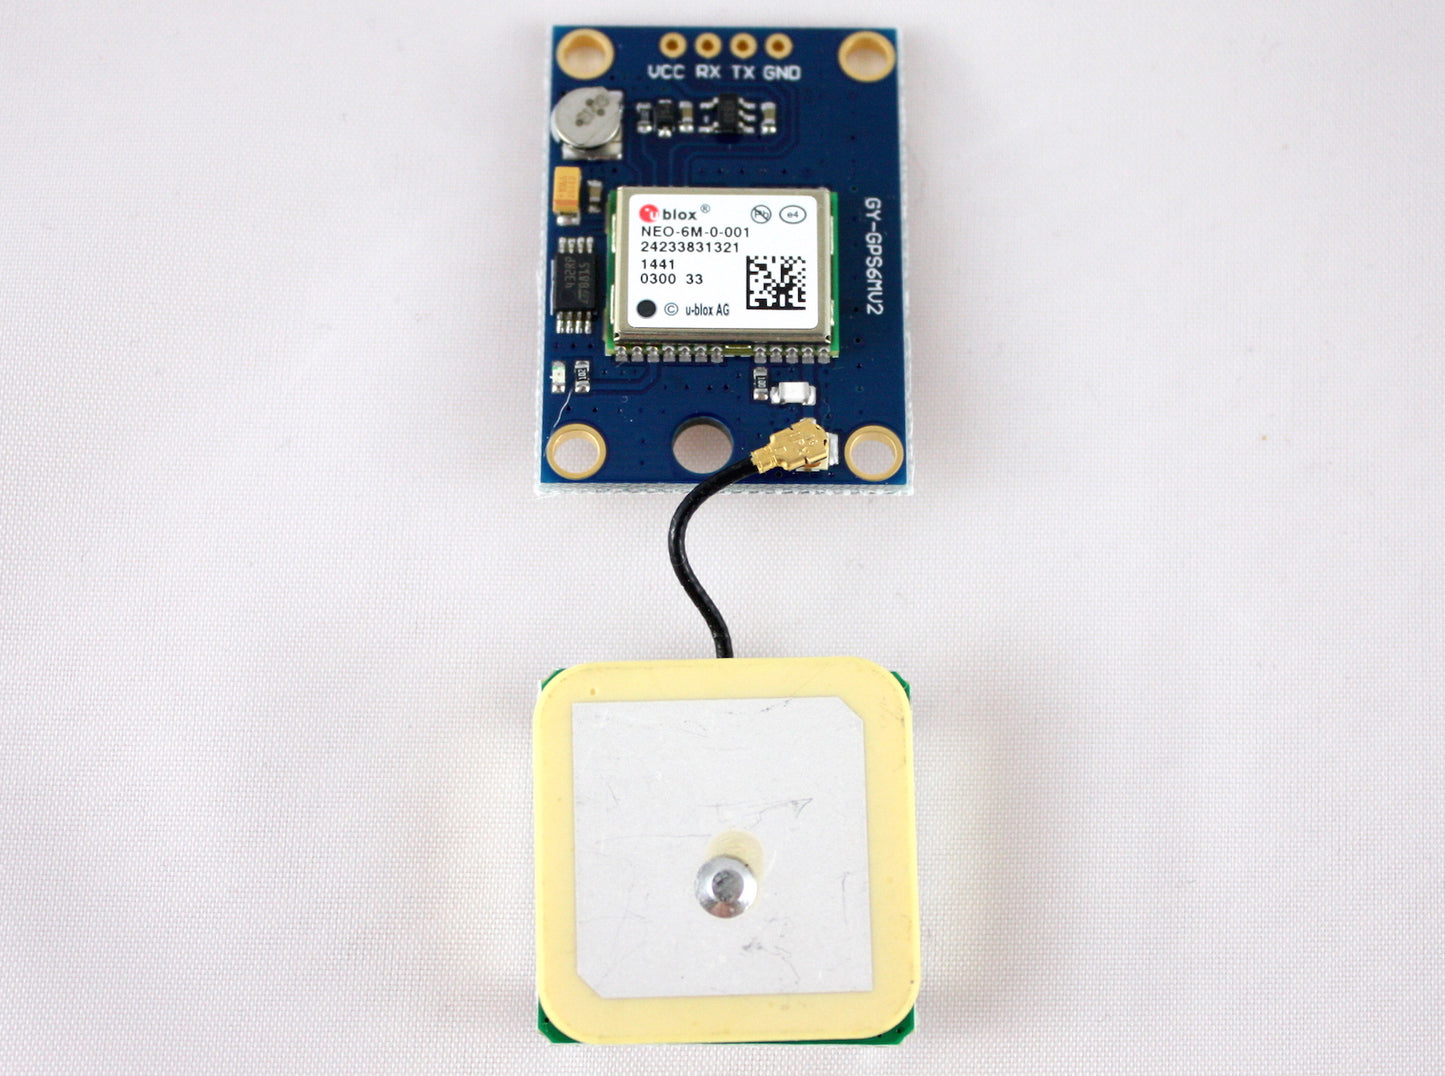 GPS Module with u-blox NEO-6M and Ceramic Antenna for Arduino and Flight Controllers